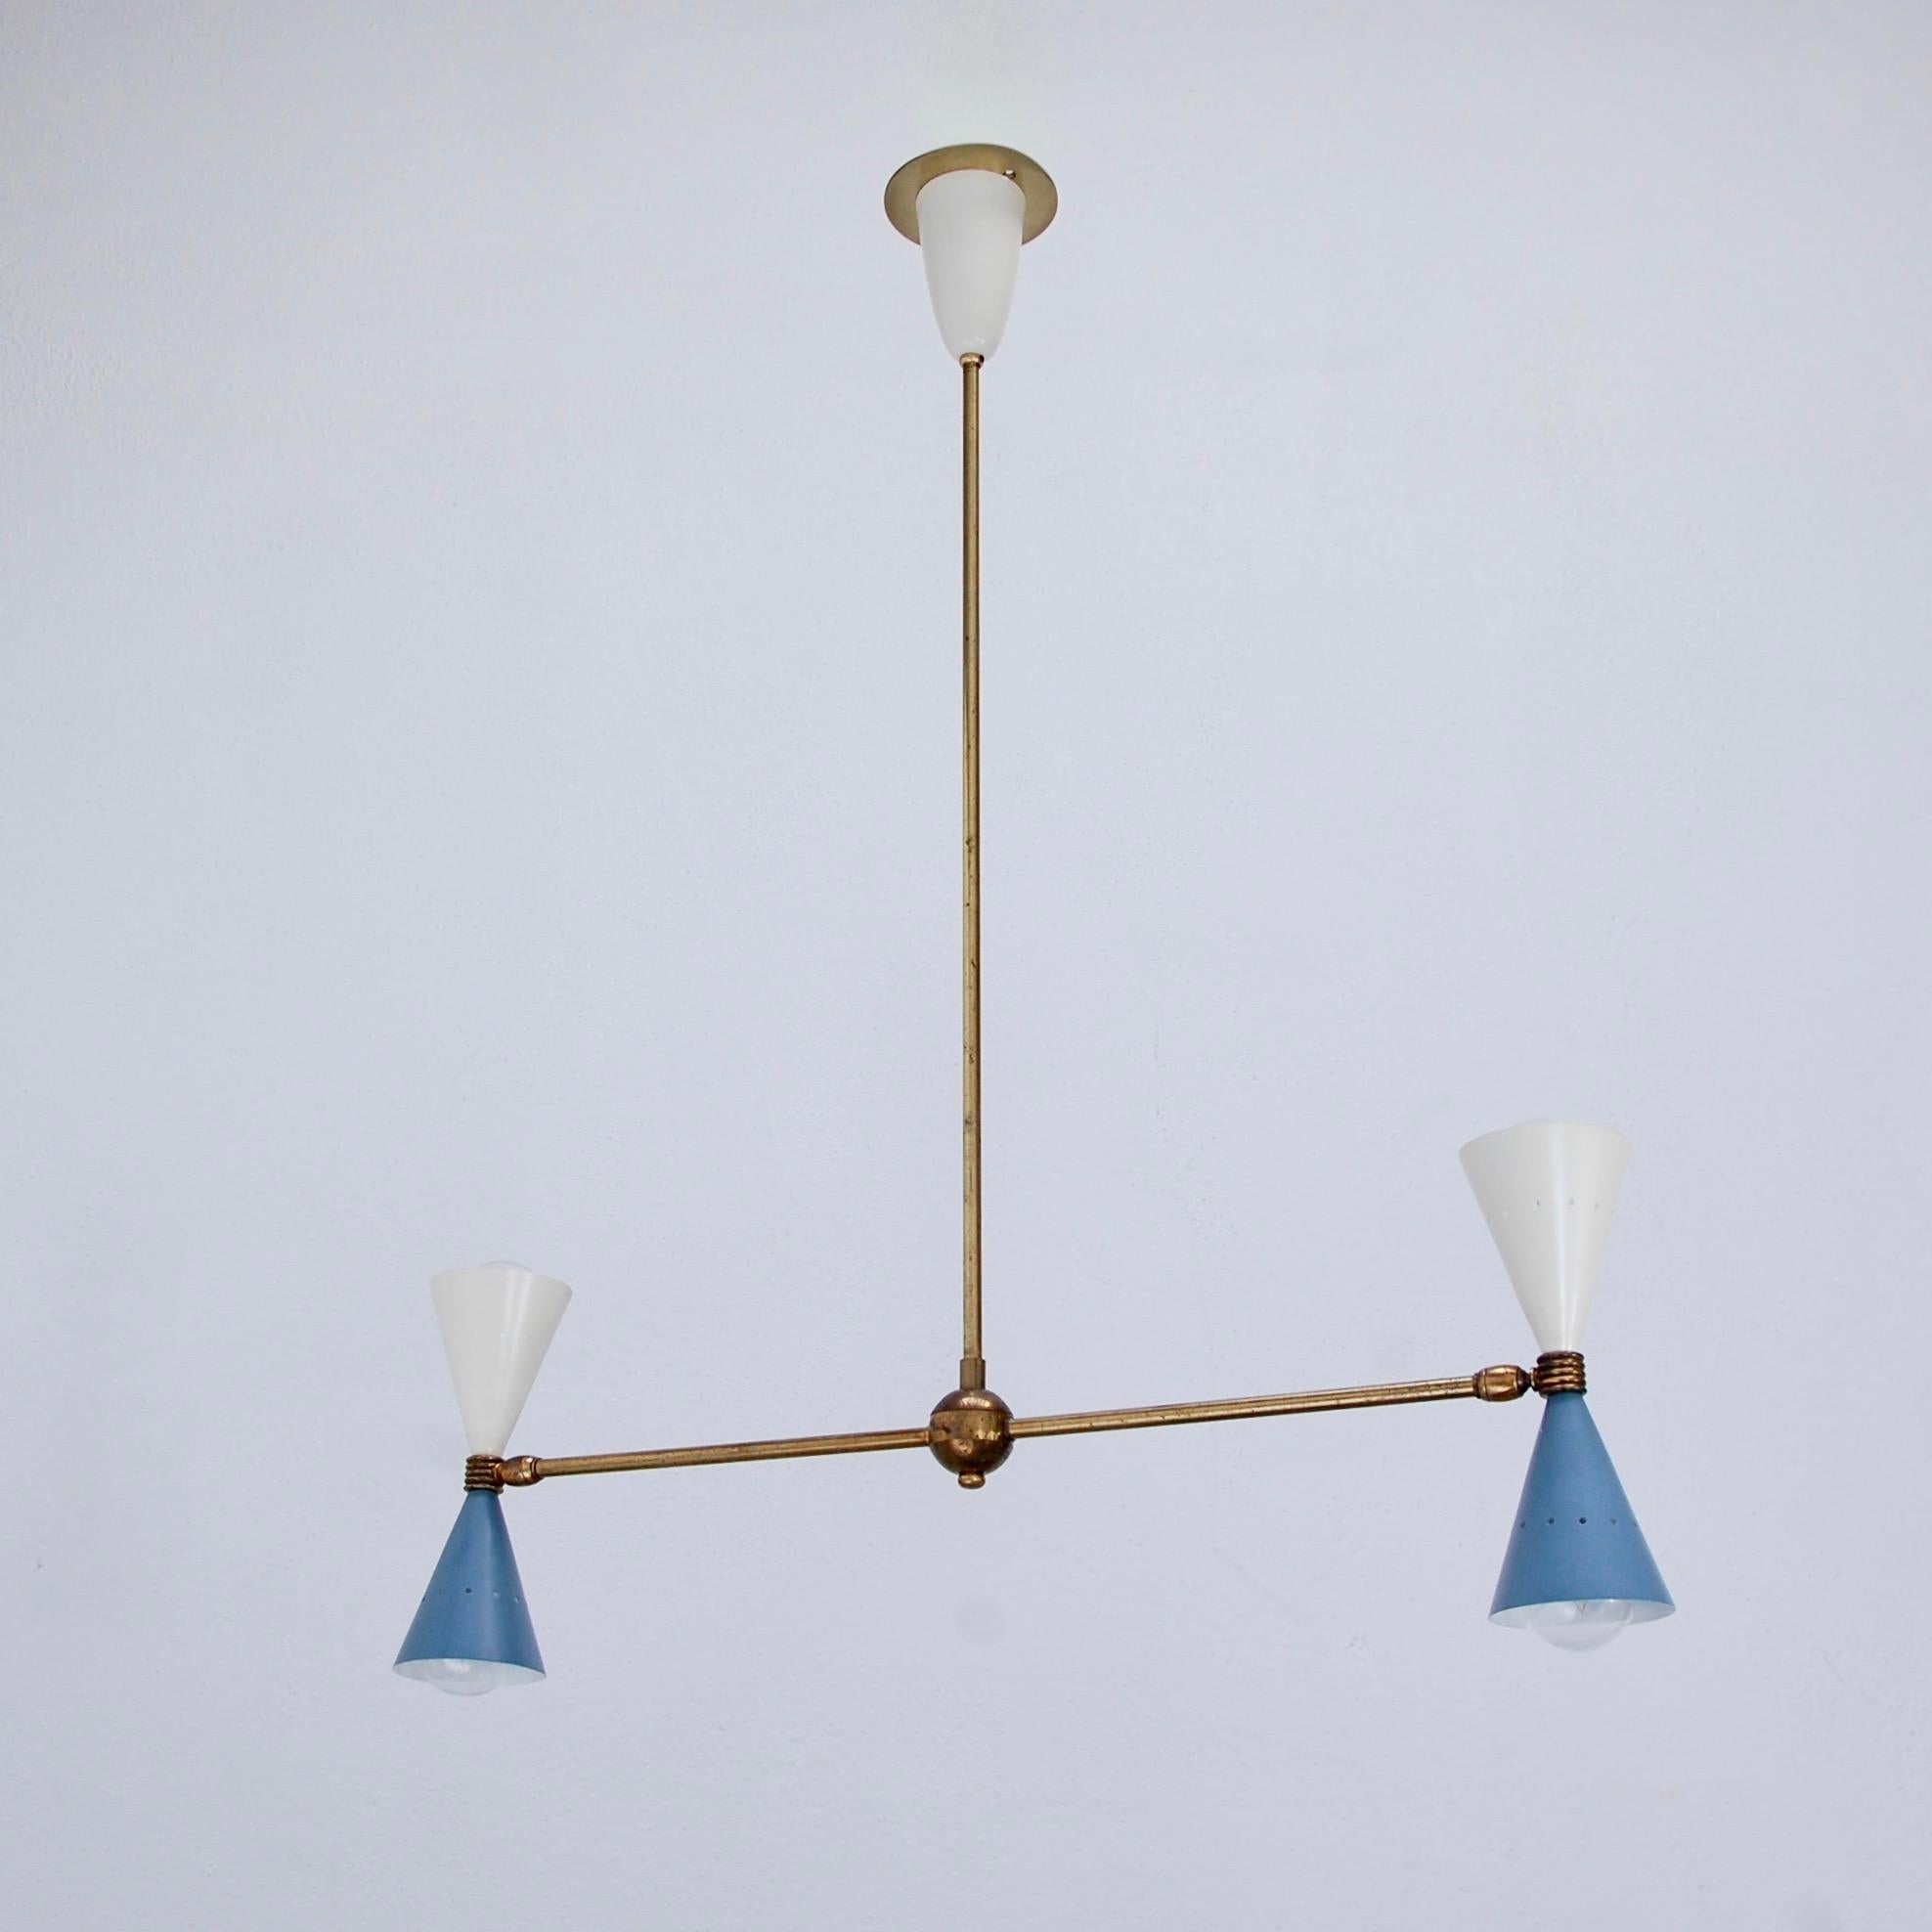 Fine and Minimalist Mid-Century Modern Italian double cone pendant chandelier in original brass finish with painted aluminum up and down cone shade. Partially restored. Rewired with (4) E12 candelabra based light sockets (2) per shade for the US.